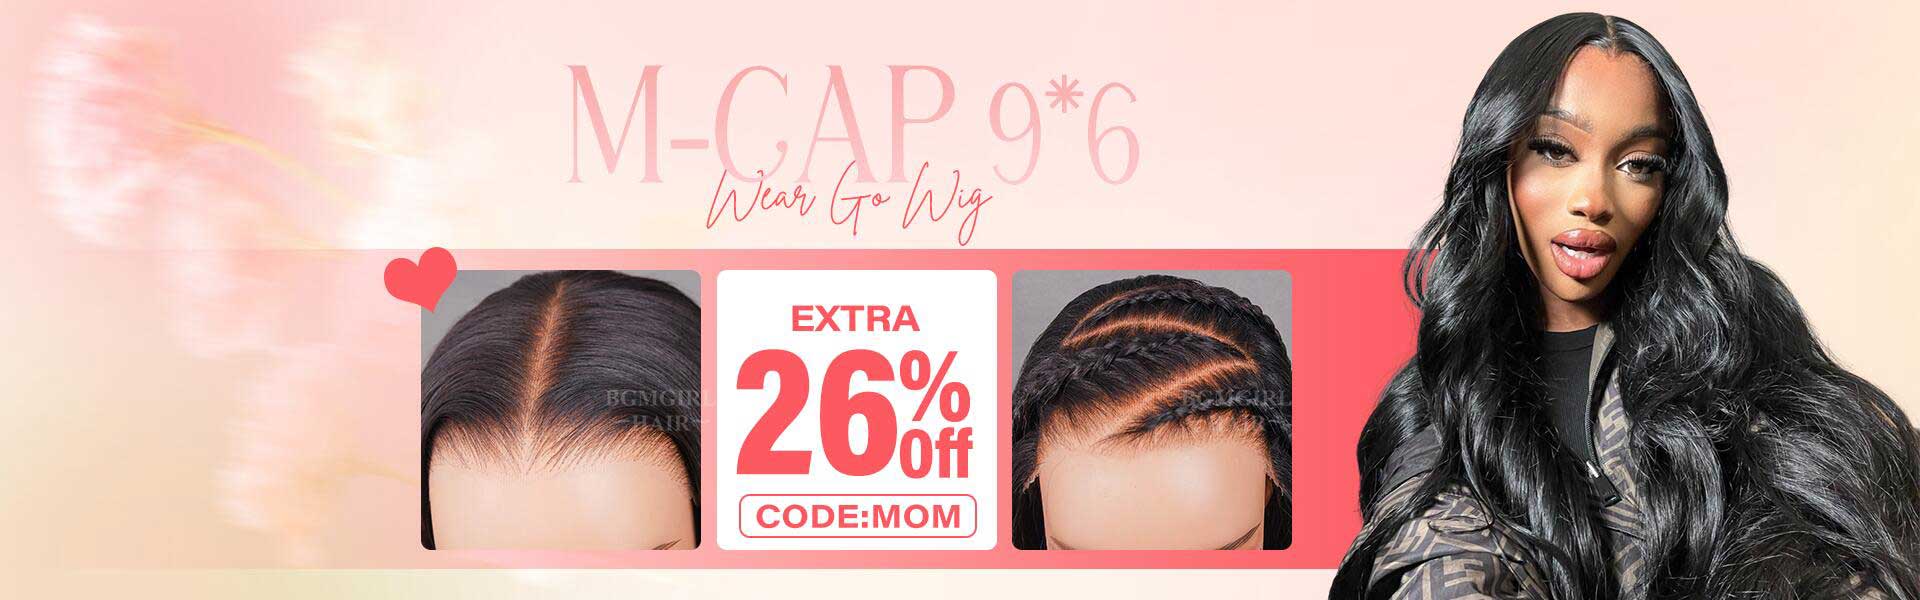 bgmgirl-mothers-day-wig-sale